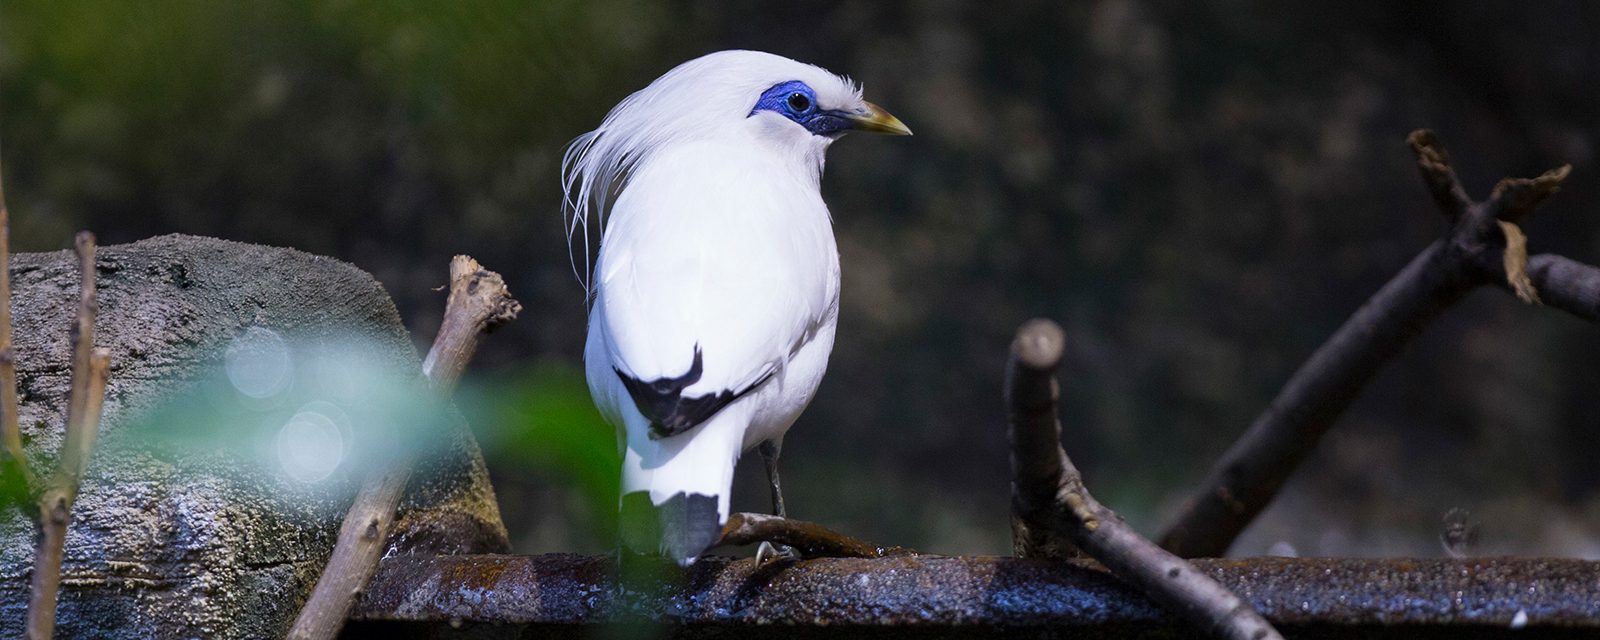 Bali myna standing on a branch in exhibit